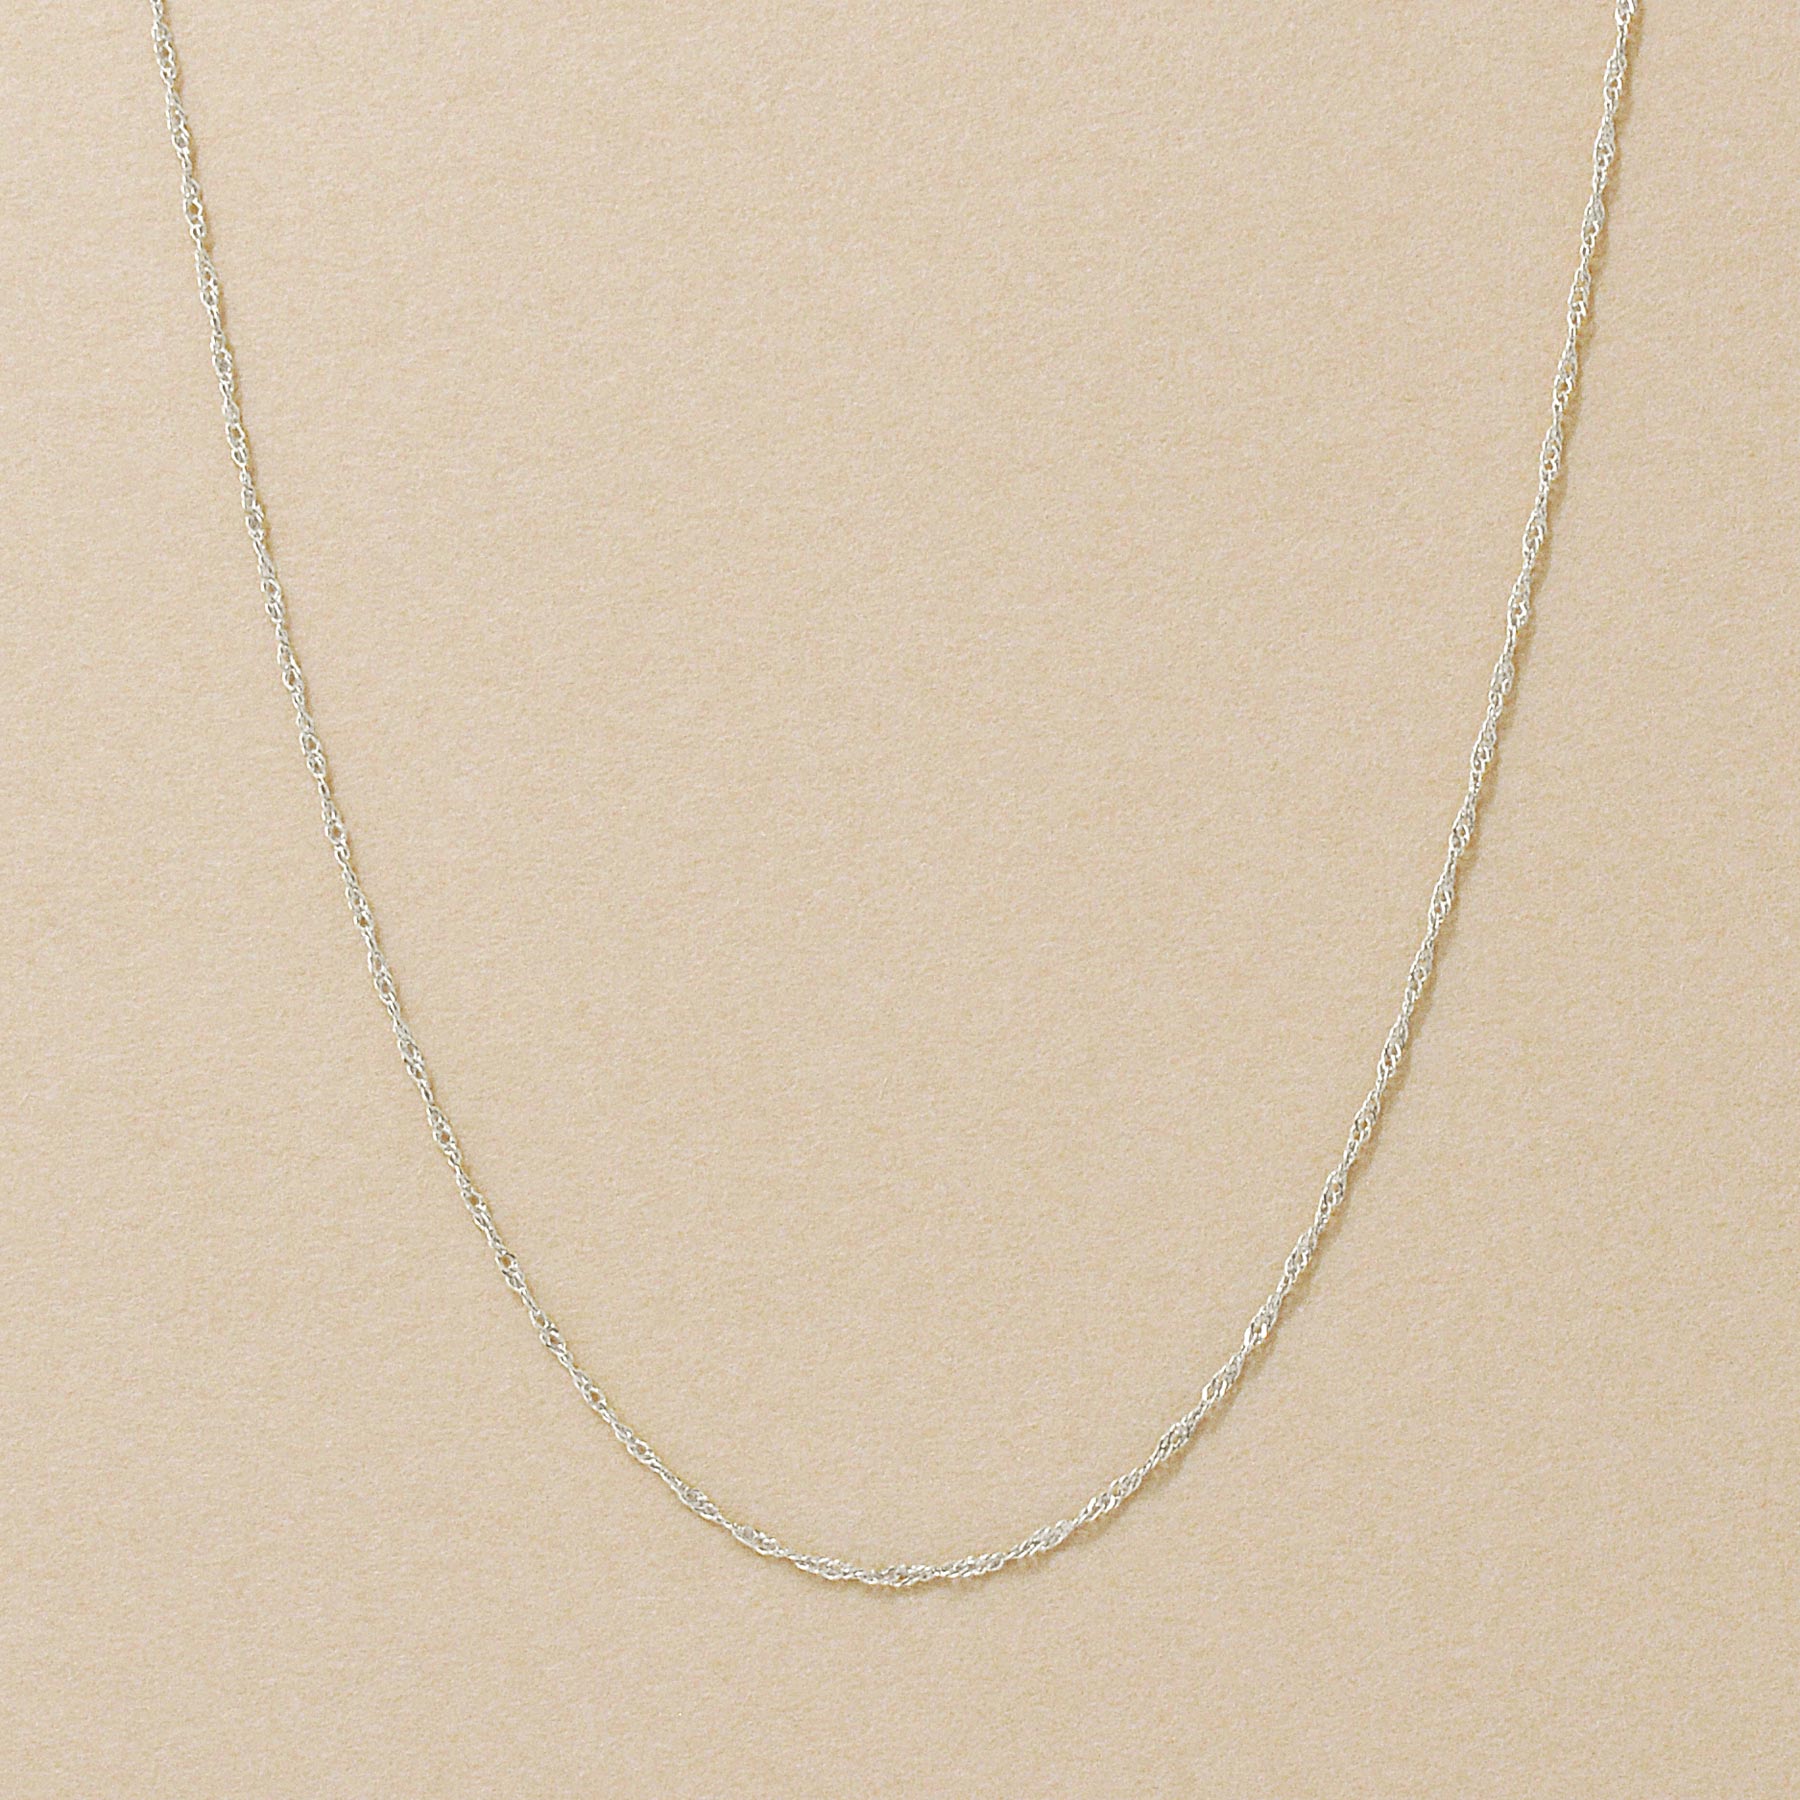 10K Screw Chain Necklace 50cm (White Gold) - Product Image